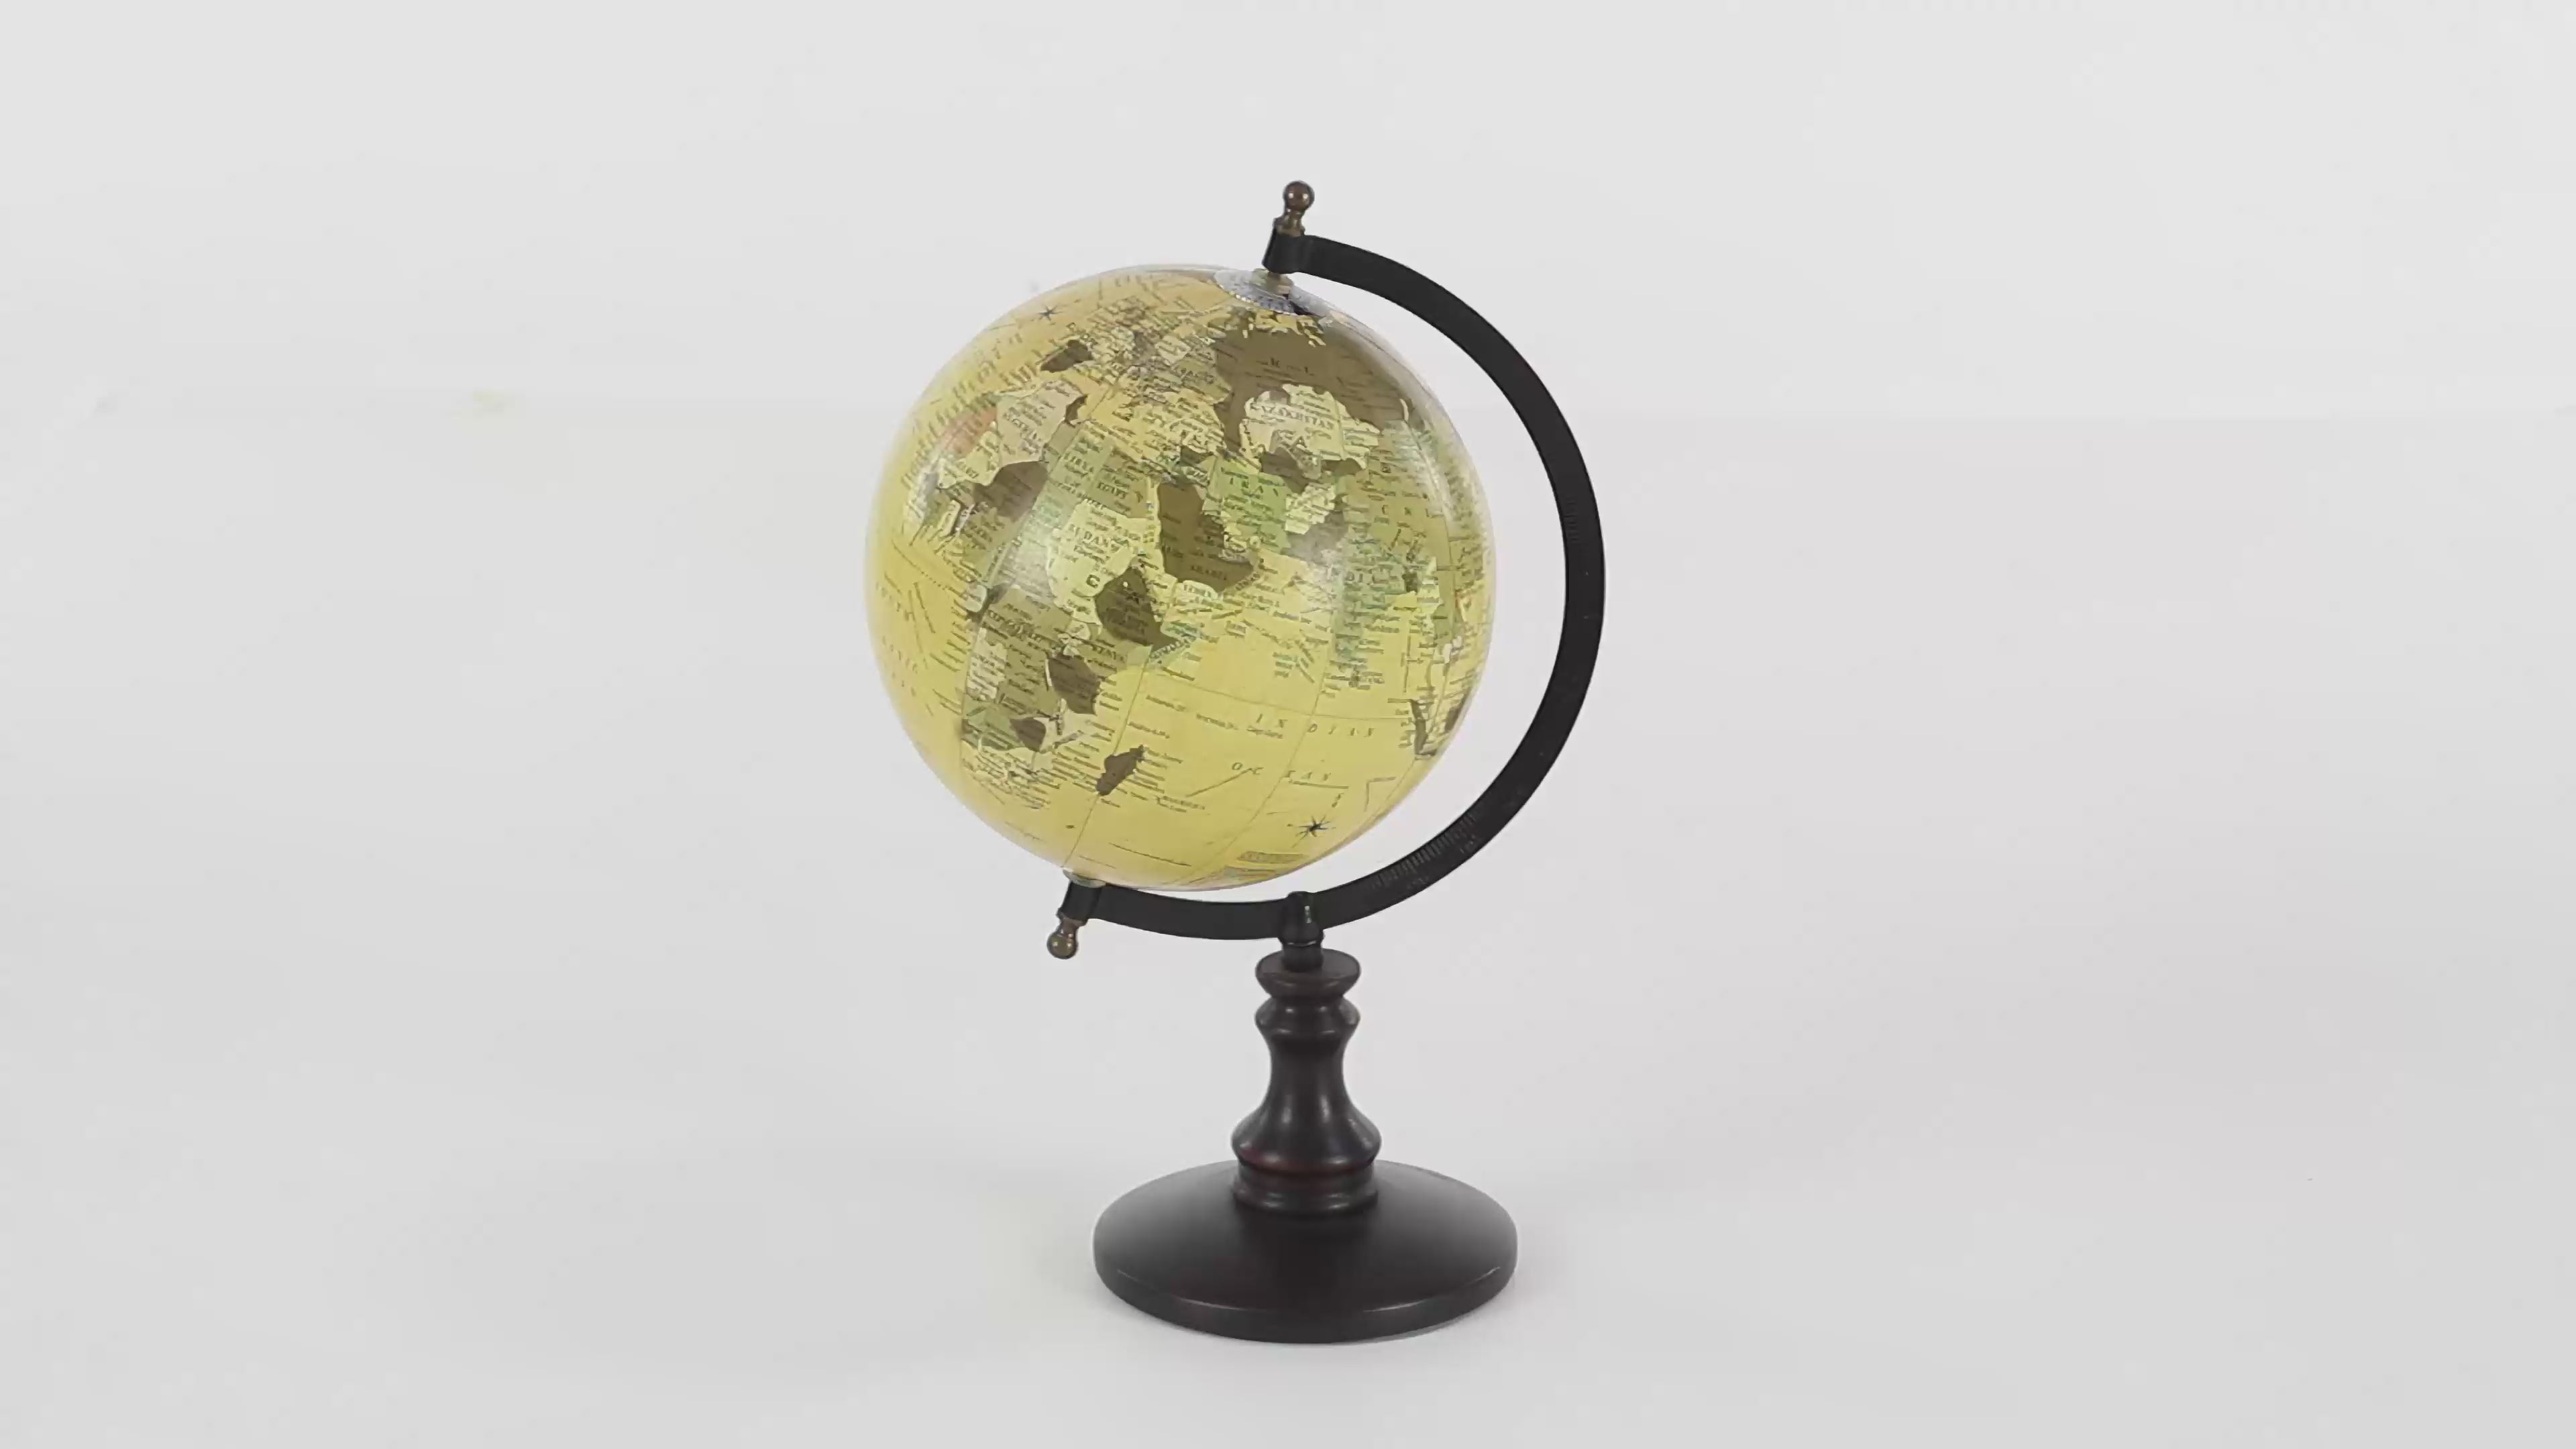 Made in a traditional design with a round dark brown stand, black metal mount and yellow sand globe. Globe is spinning in 360 degrees and all background is white